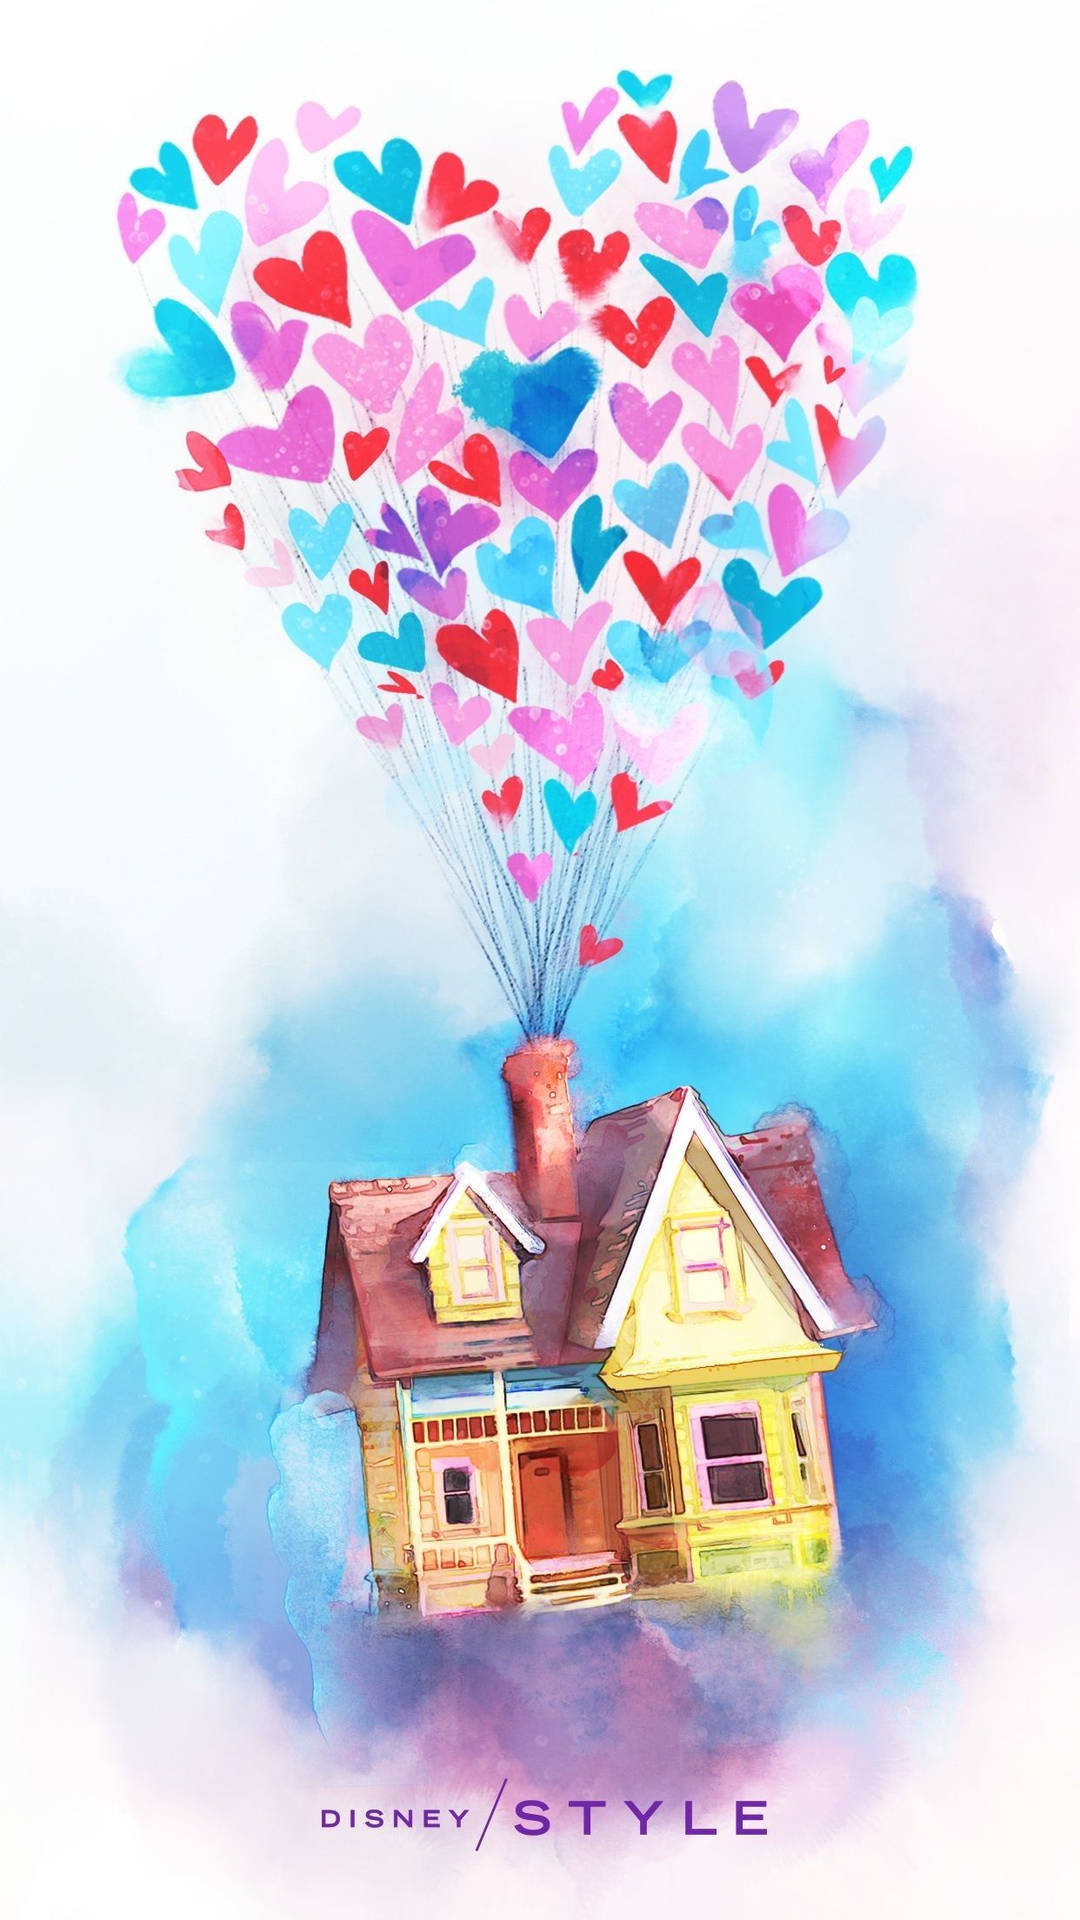 Movie Up Heart Balloons Painting Background